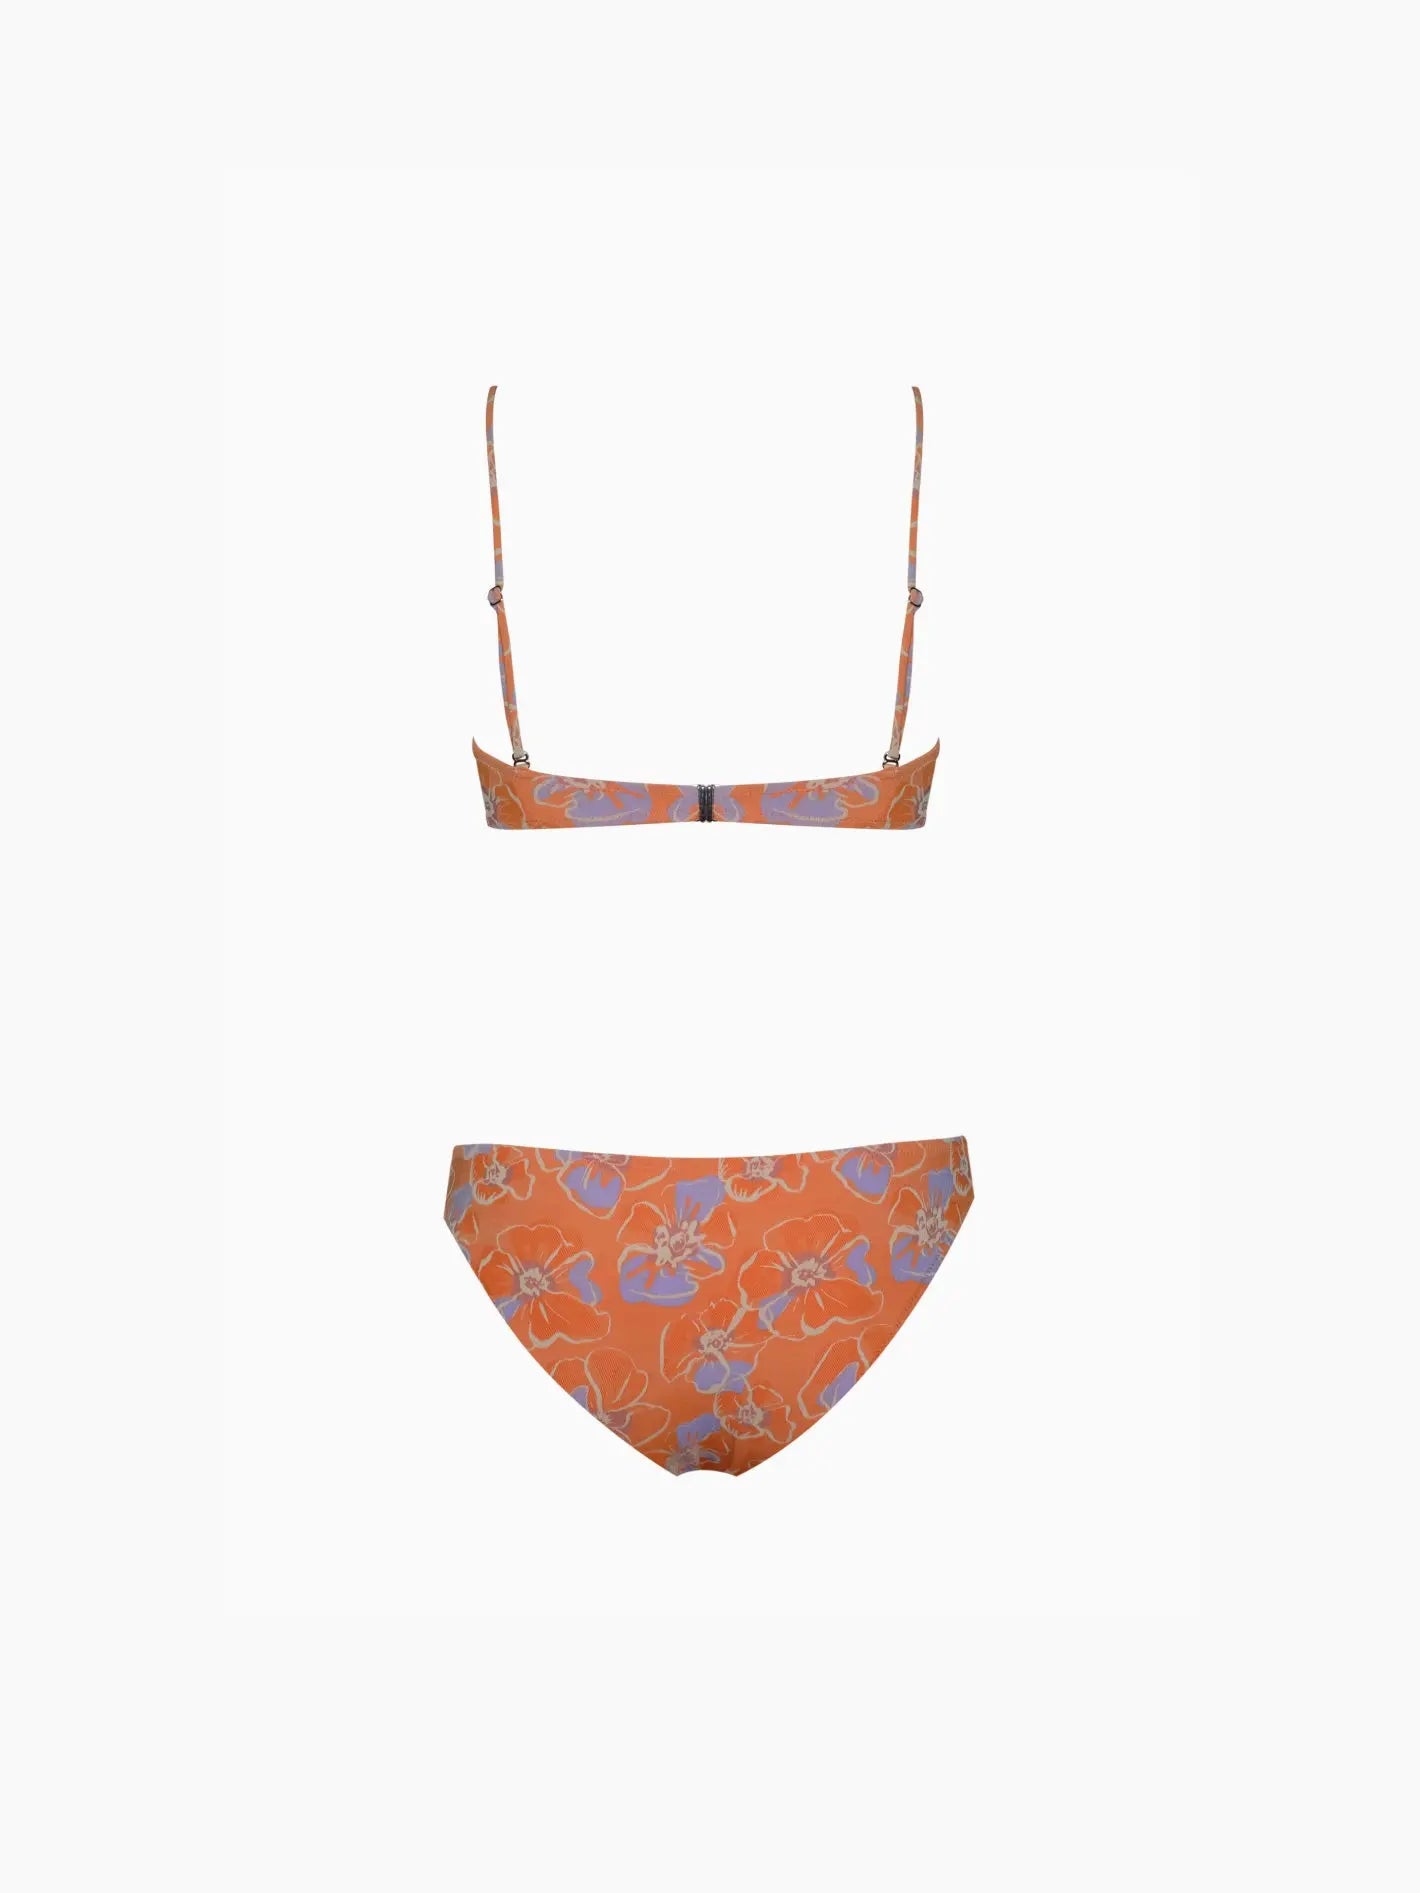 A Marais Bikini Mandarina with thin shoulder straps and a floral pattern. The top is a bandeau style, and the bottoms are classic bikini-cut. The floral design features shades of blue and white. Displayed against a plain white background, this stunning piece from Pale is available at Bassalstore in Barcelona.